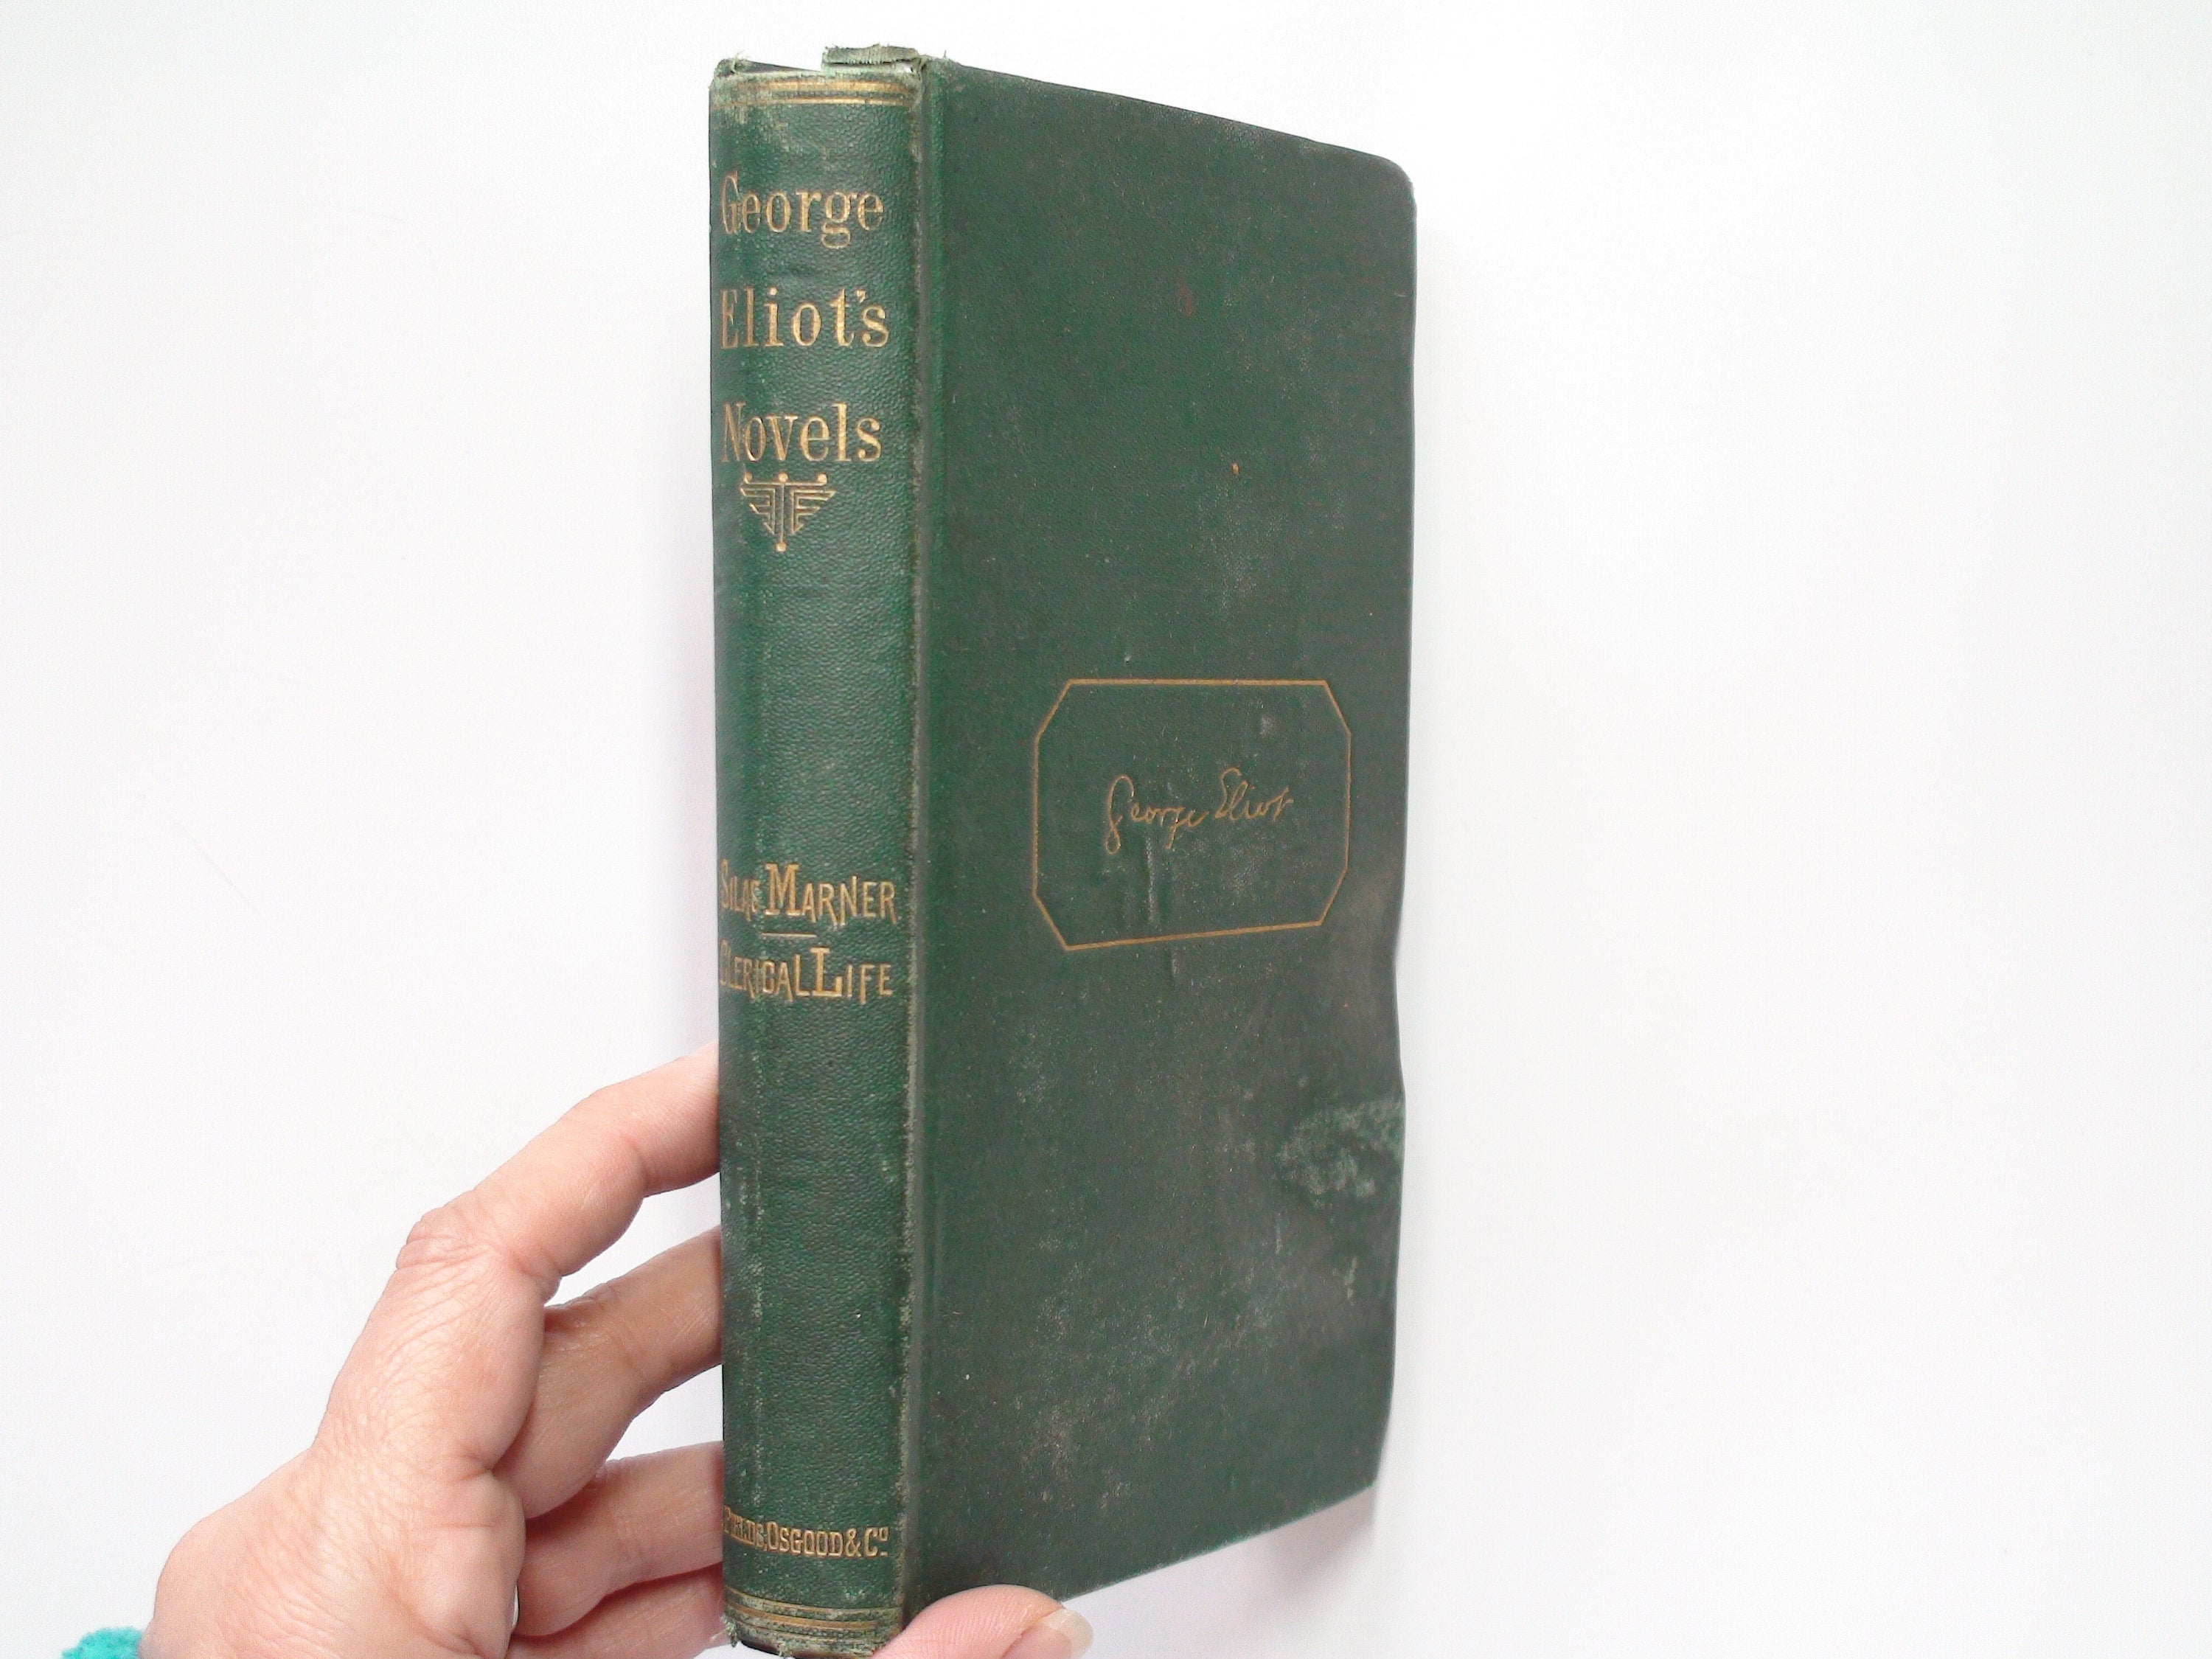 Silas Marner and Scenes of Clerical Life by George Eliot, Household Ed, 1869